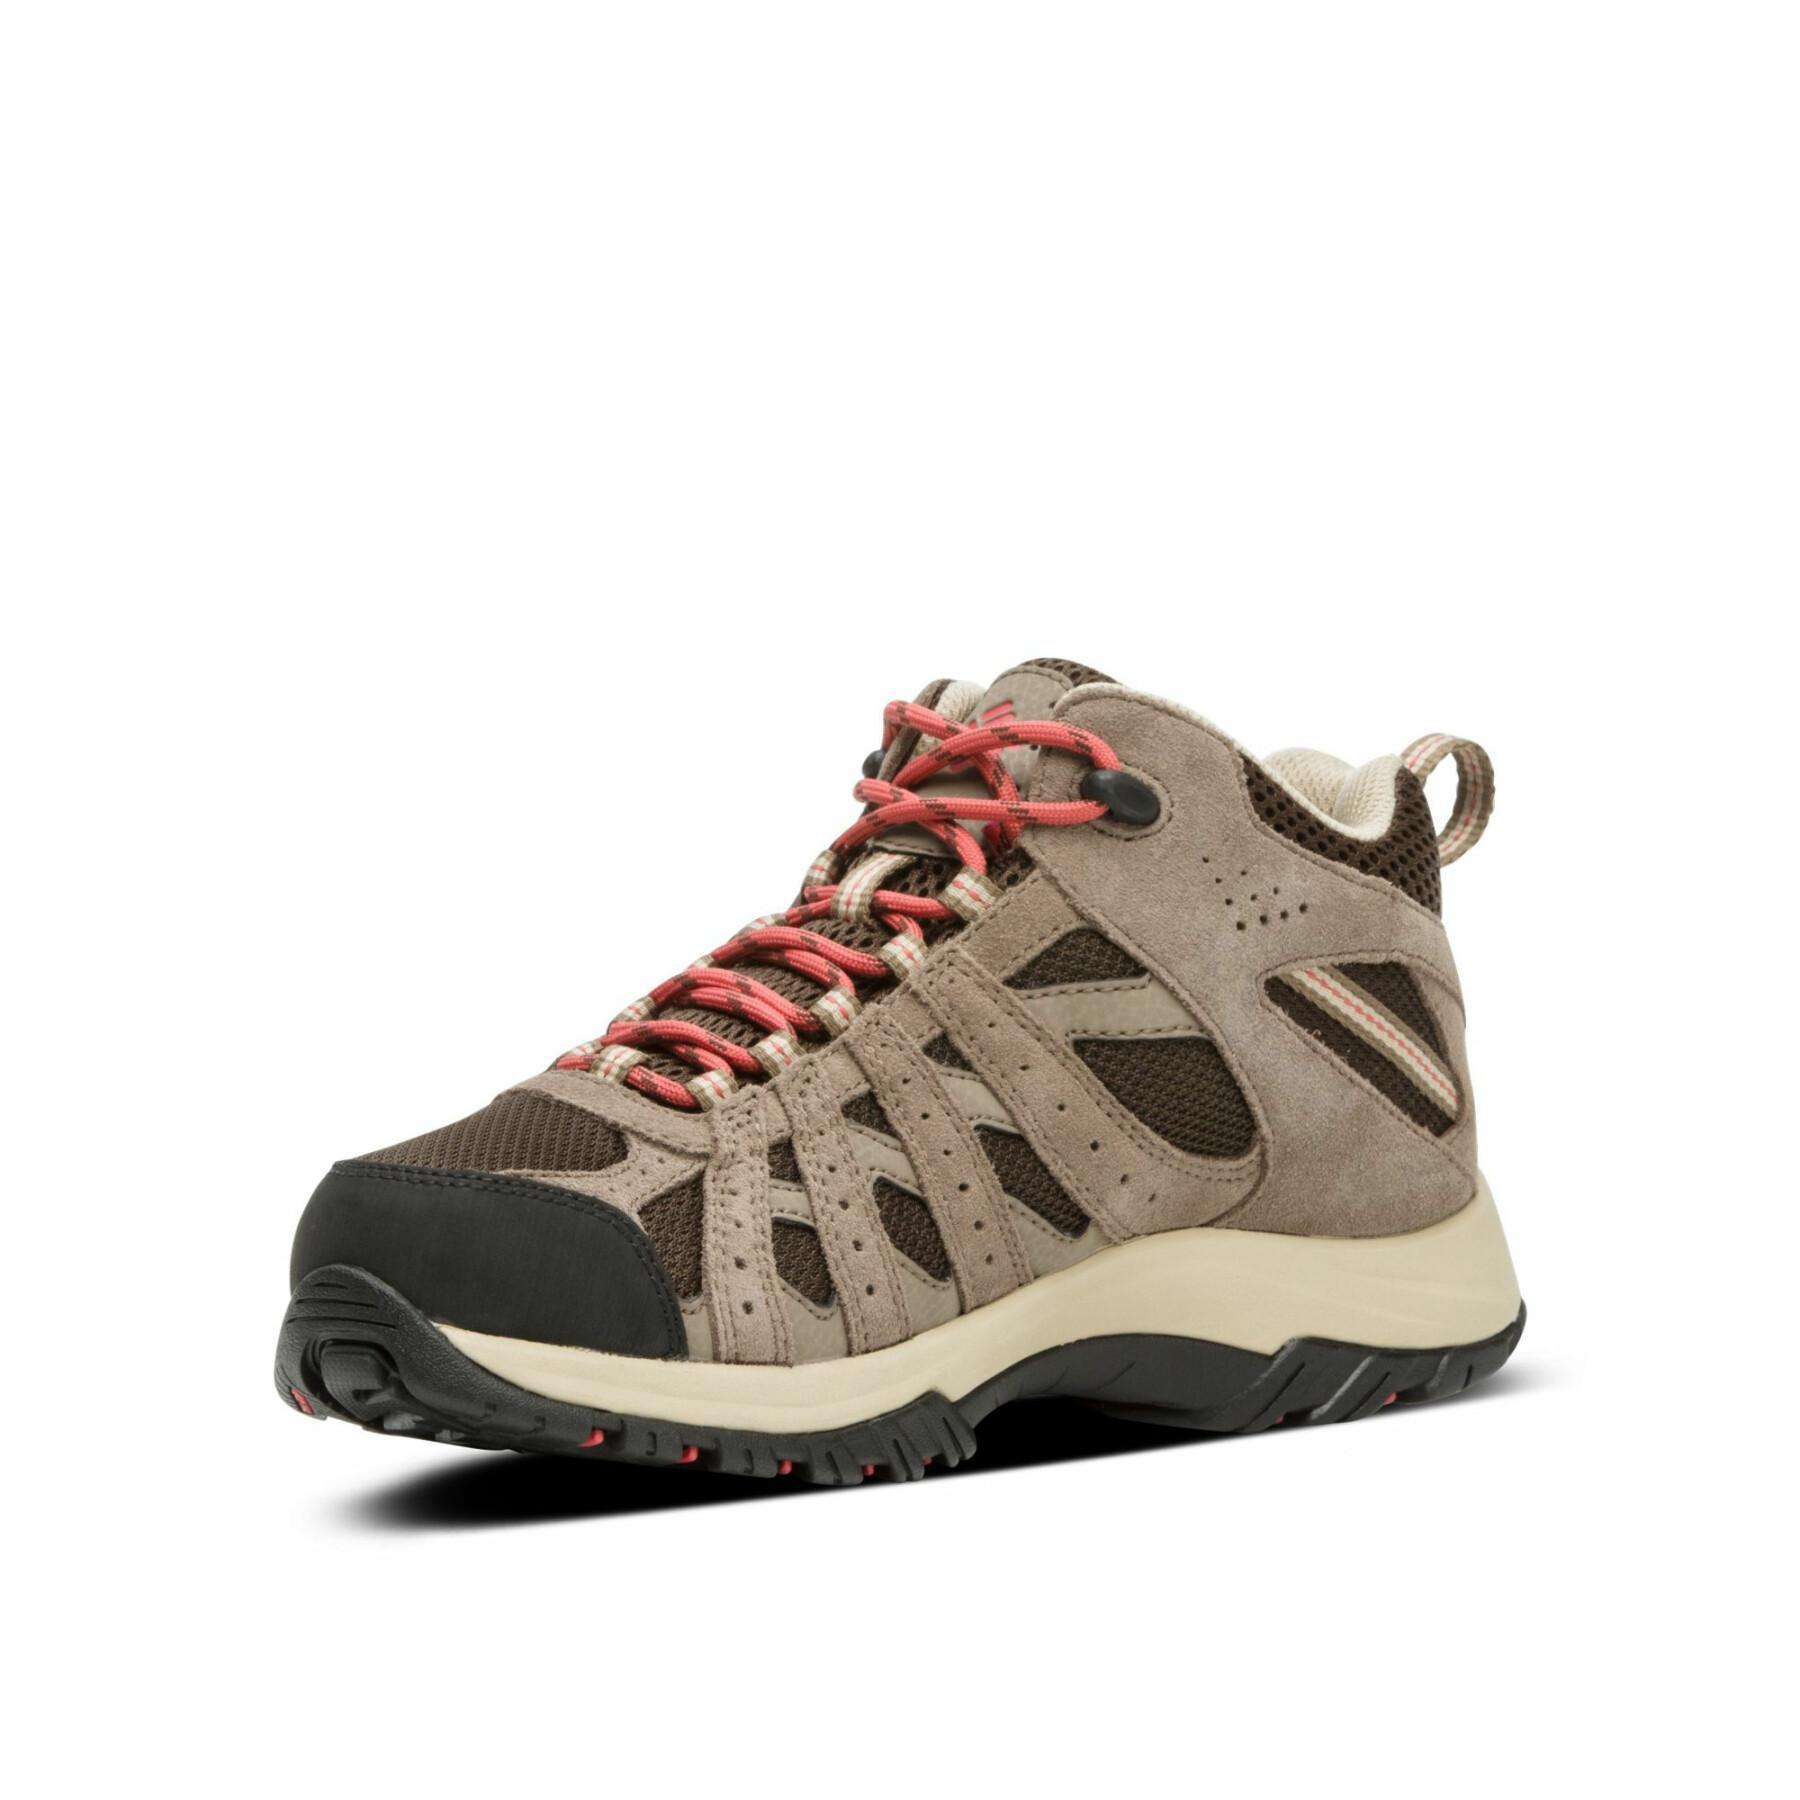 Chaussures femme Columbia Canyon Point Mid